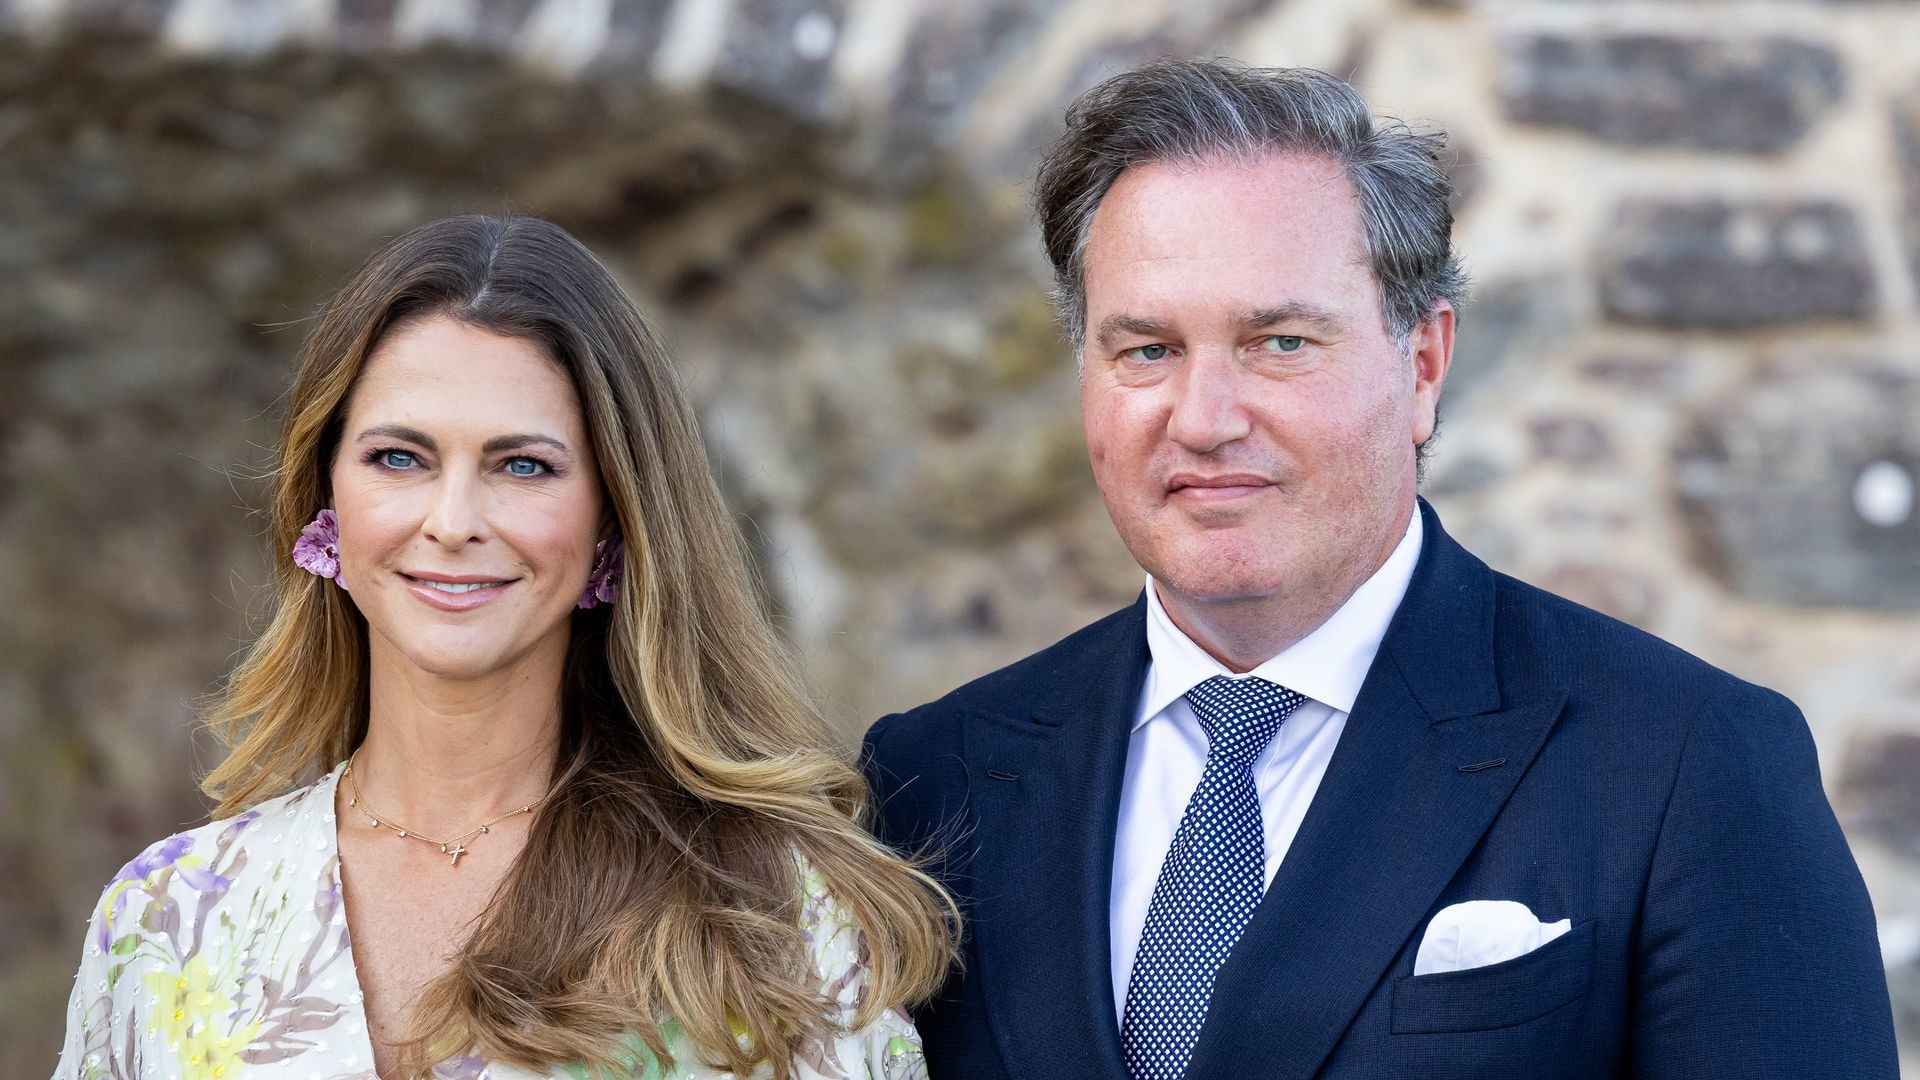  Princess Madeleine of Sweden and Chris ONeill at Crown Princess Victoria's birthday